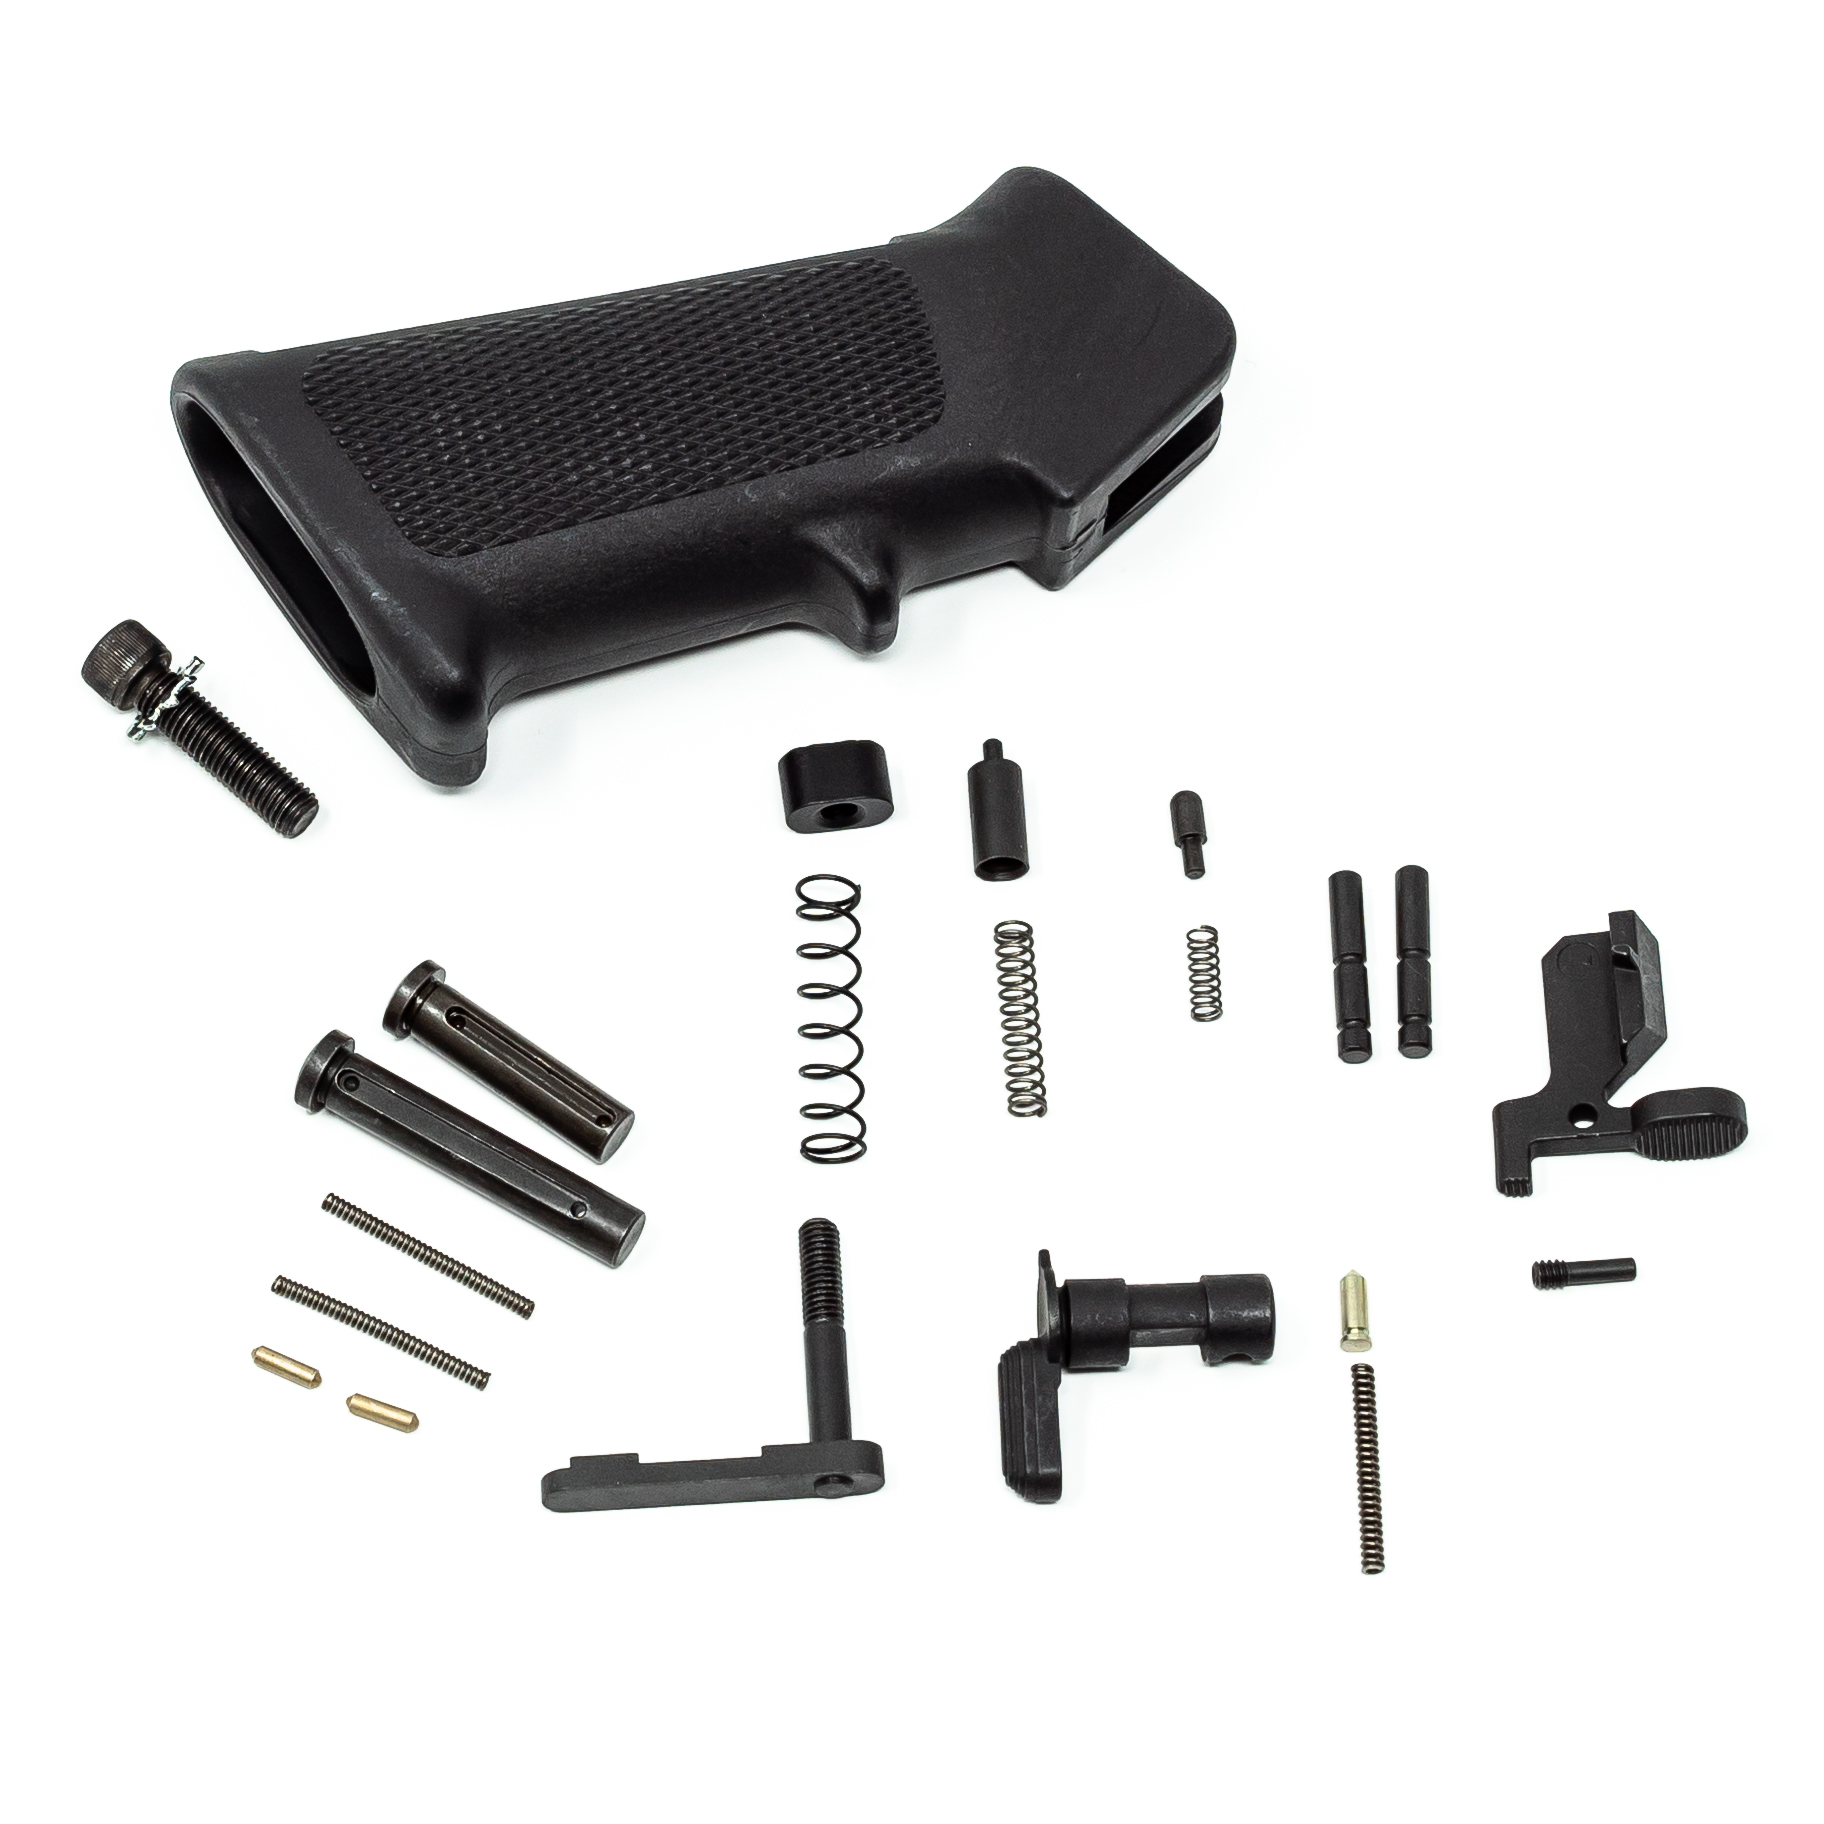 Luth AR Lower Parts Kit - 308